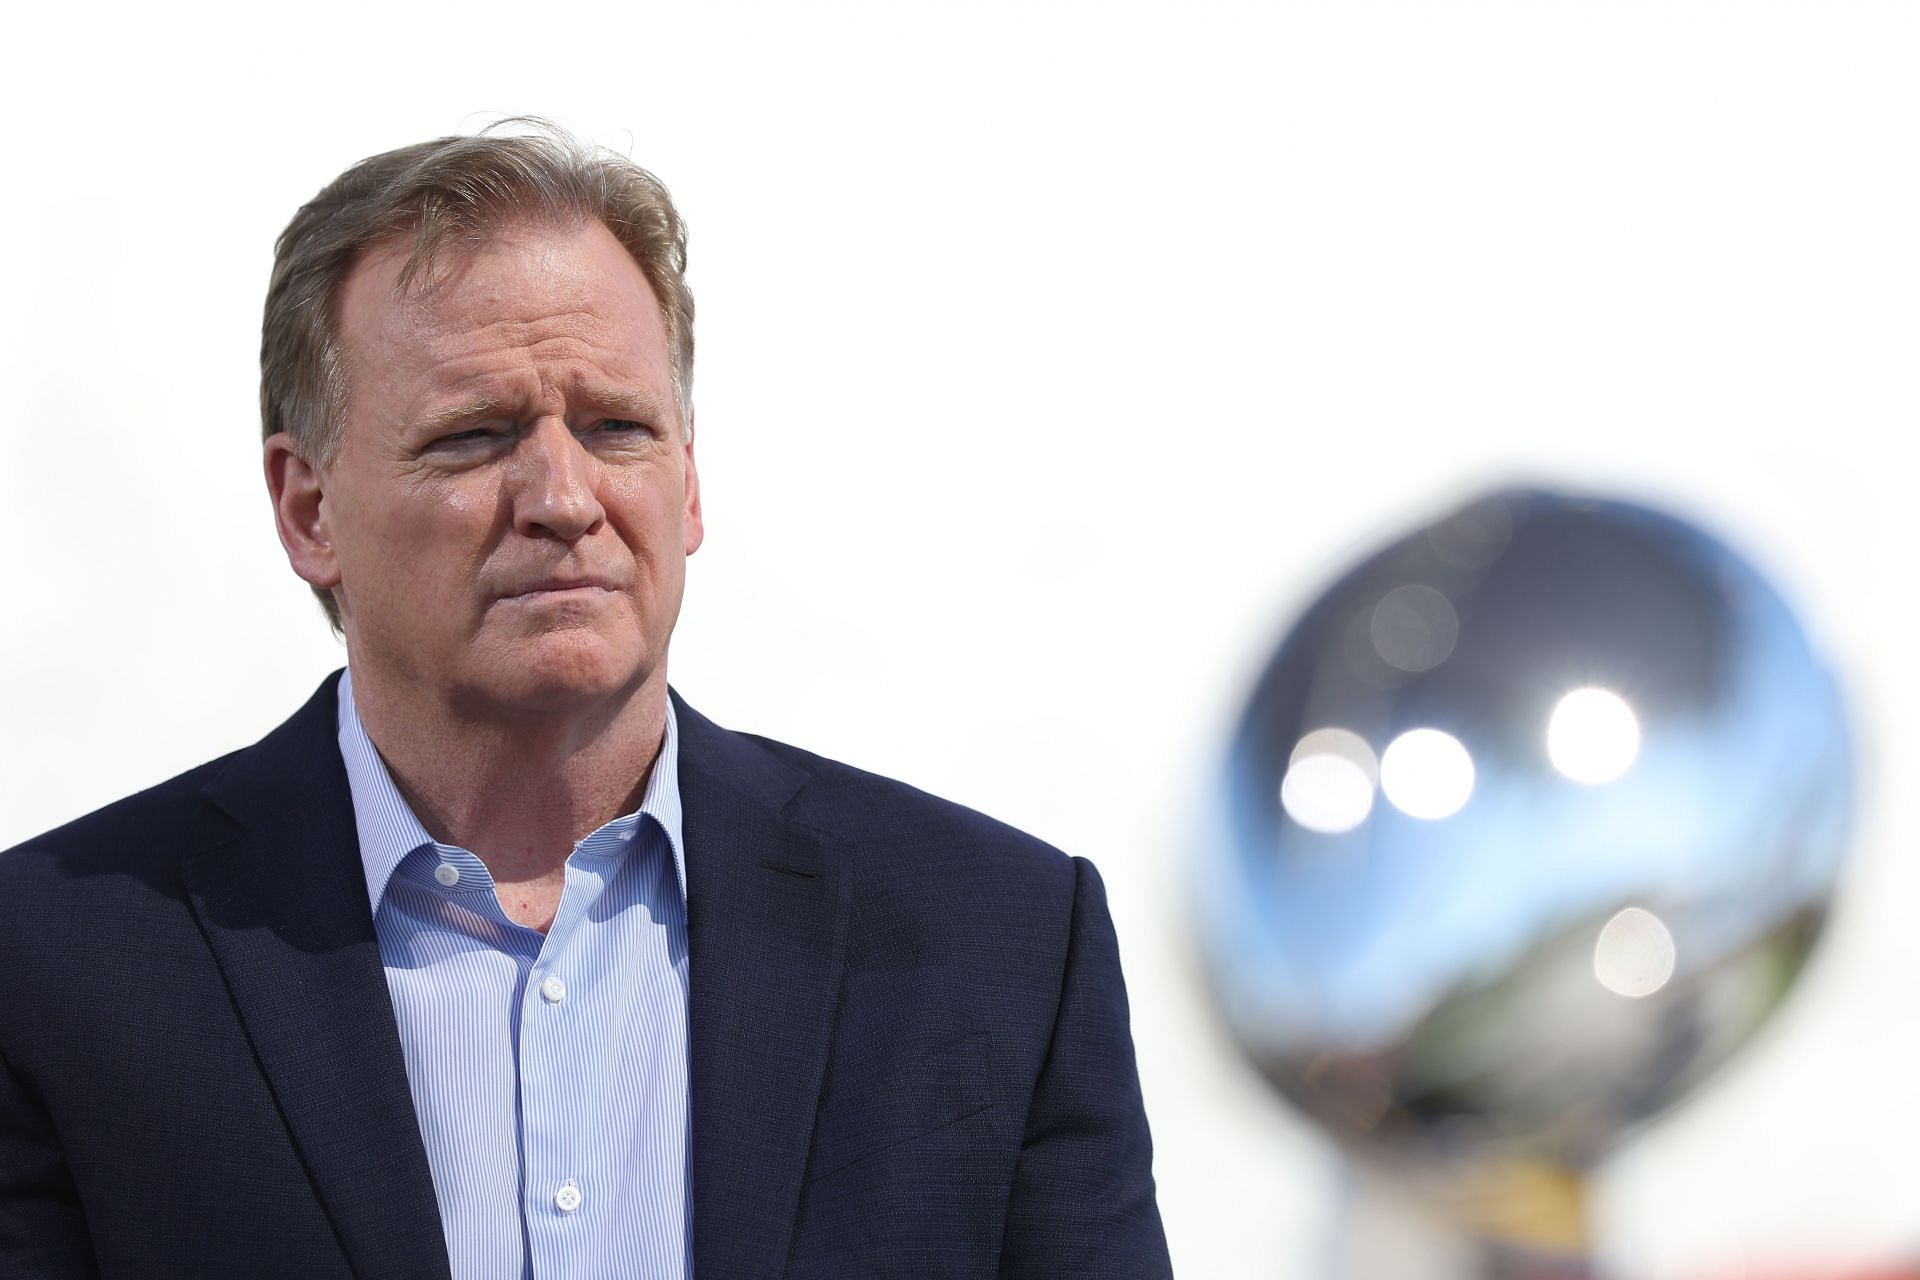 Roger Goodell is going to make a statement to the House Oversight Committee